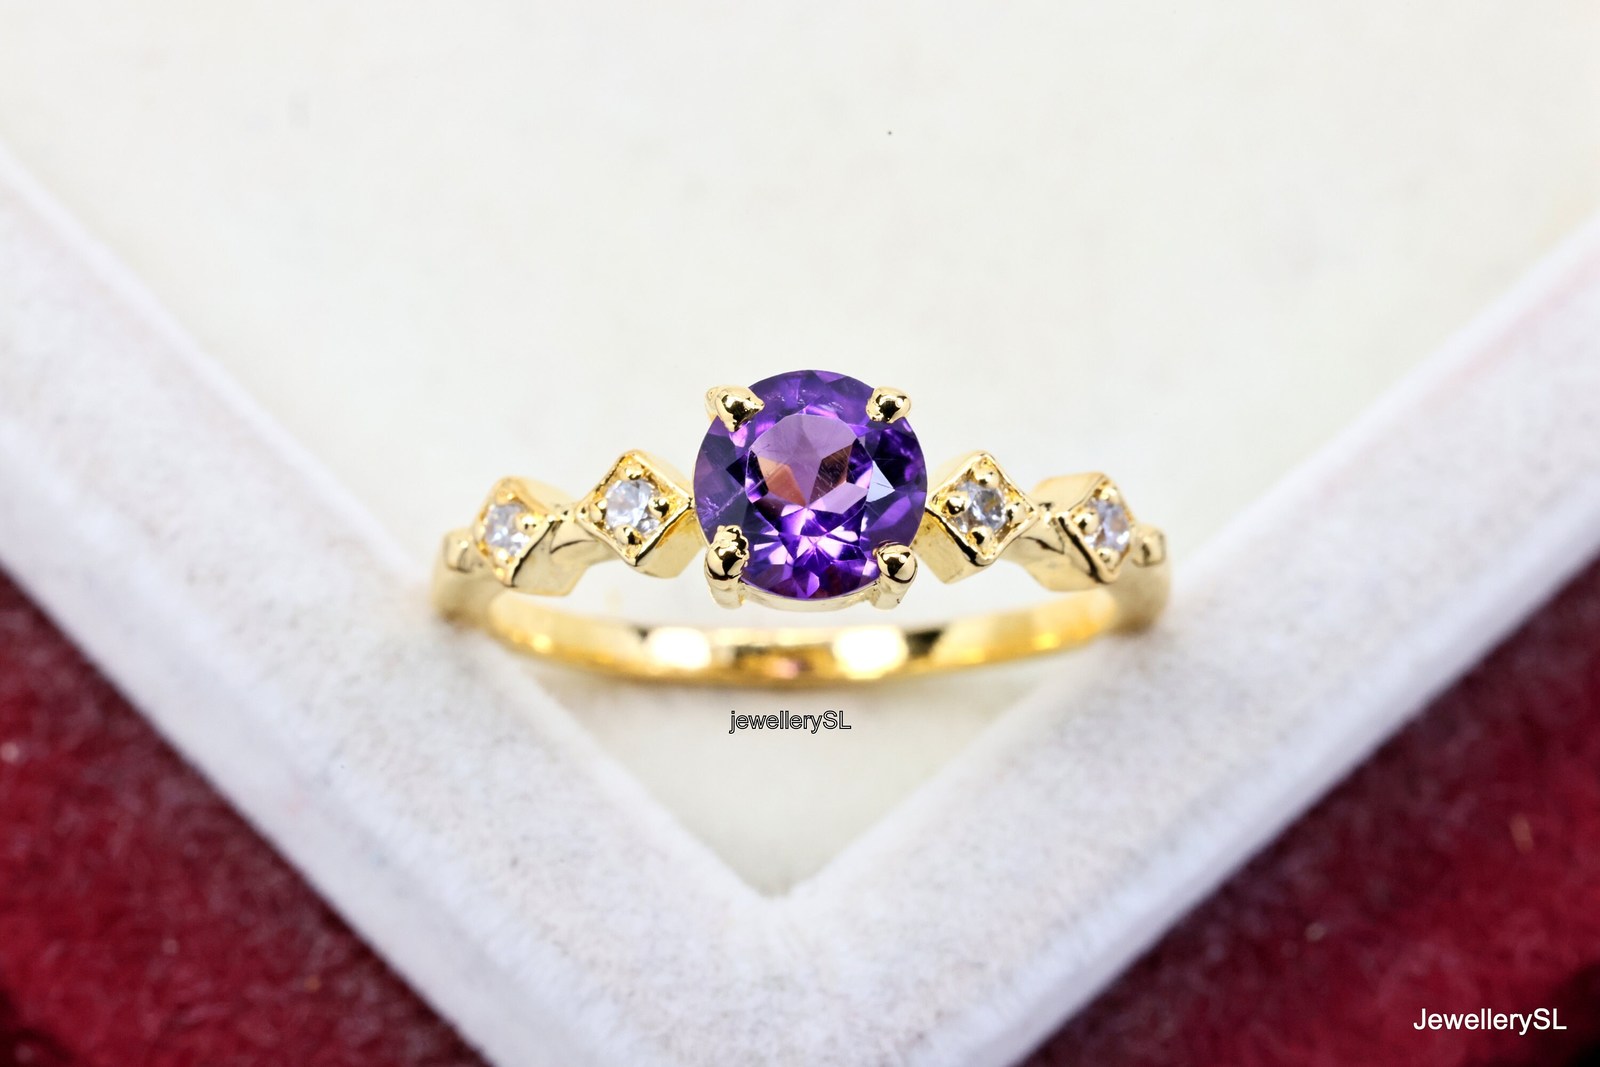 Primary image for Stackable 6mm Amethyst Ring,Yellow/White/Rose Gold Engagement Rings, 14k gold